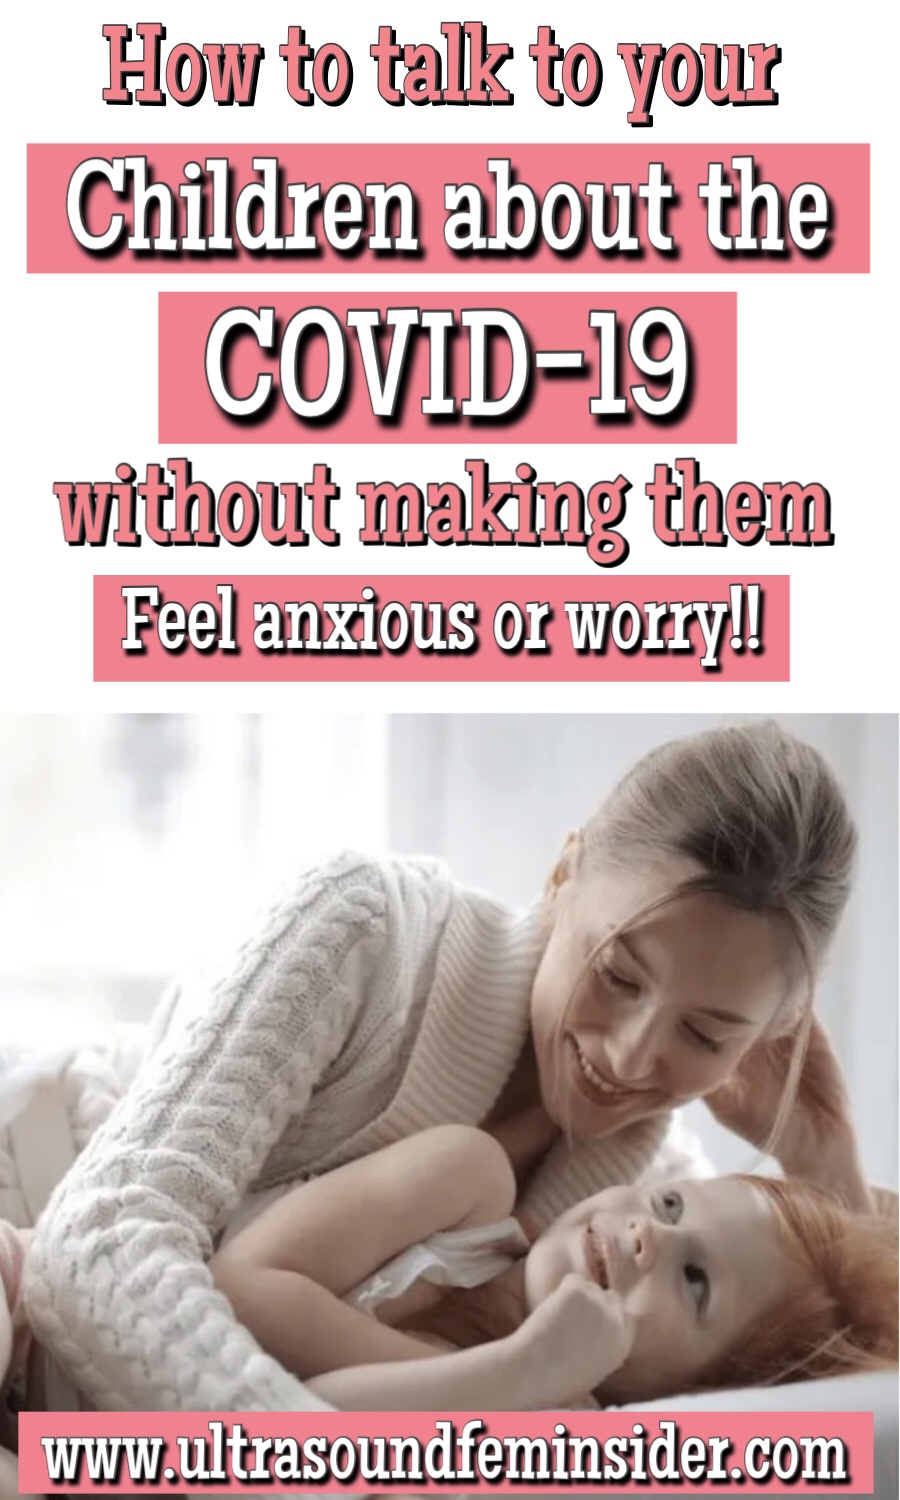 How to talk to your children about the Covid-19. 